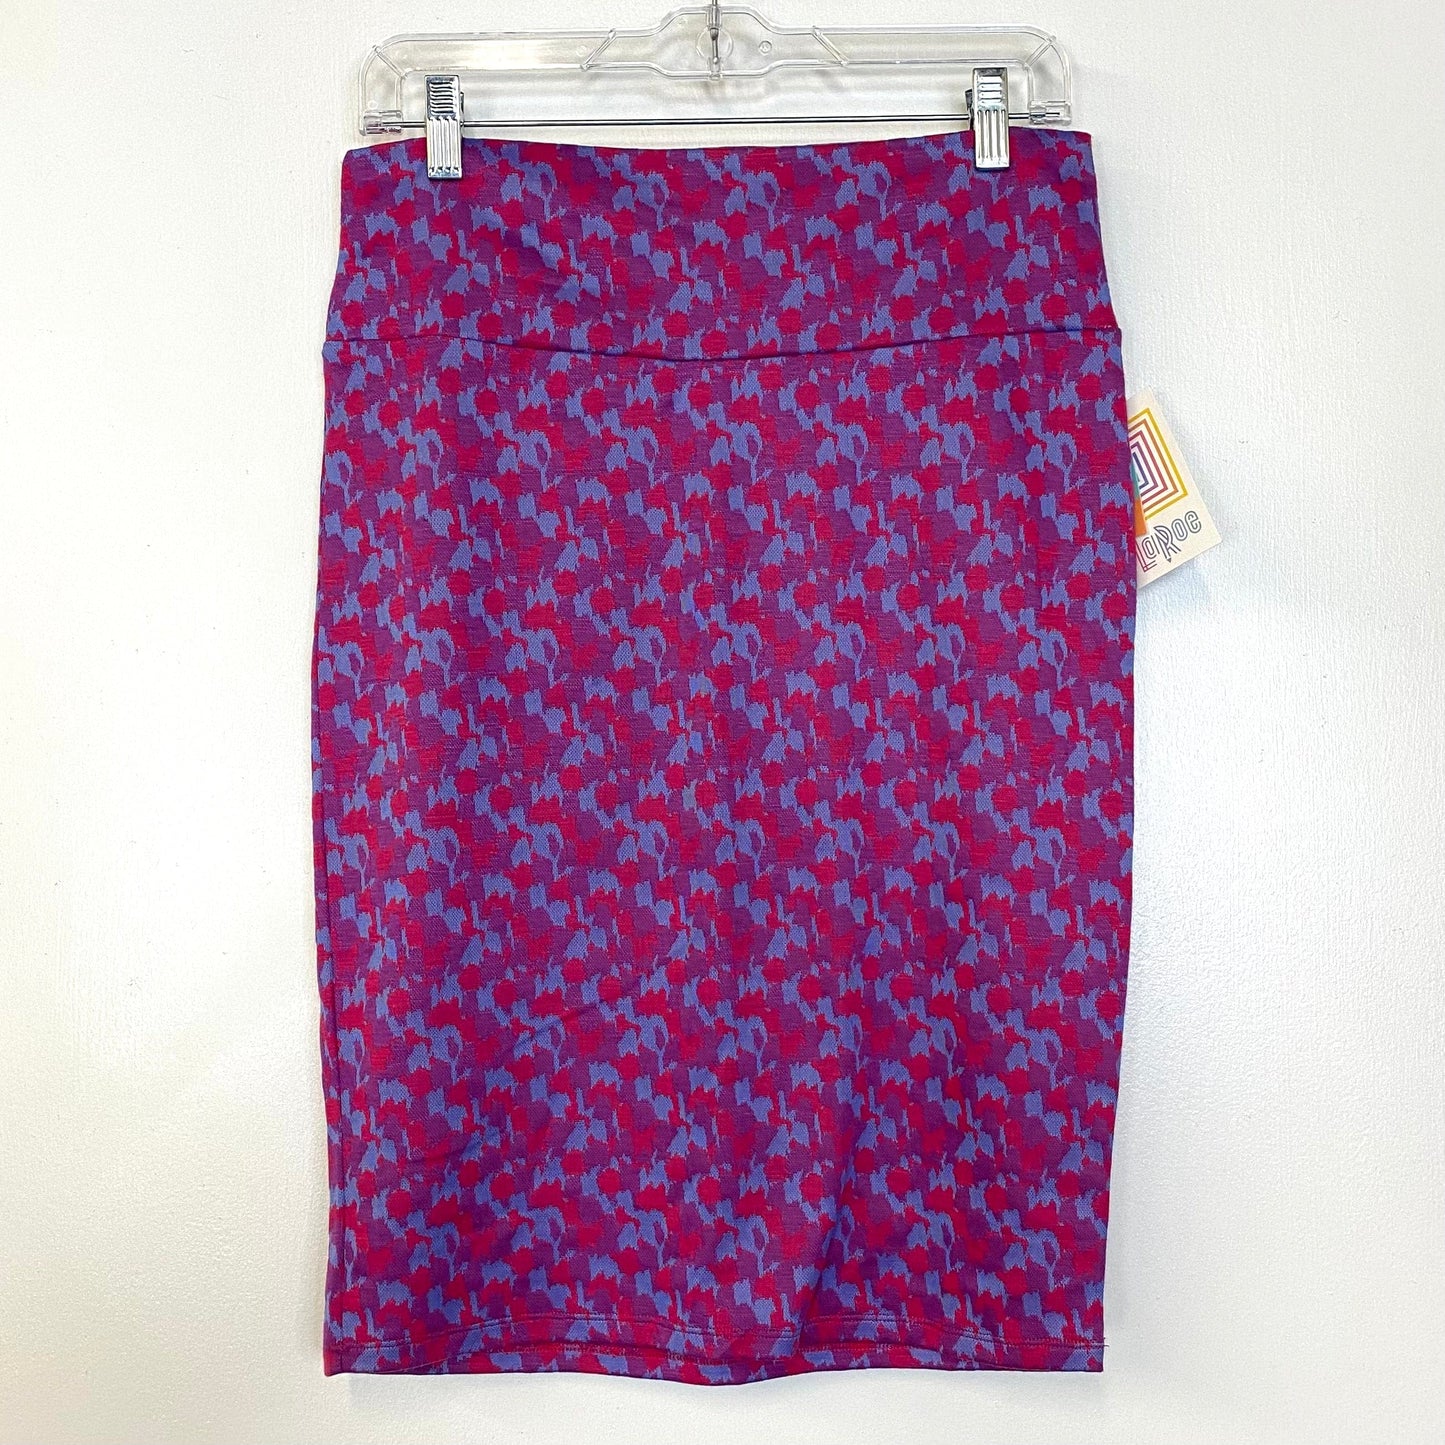 LuLaRoe Womens M Pink/Purple Abstract/Houndstooth Print Cassie Skirt NWT*